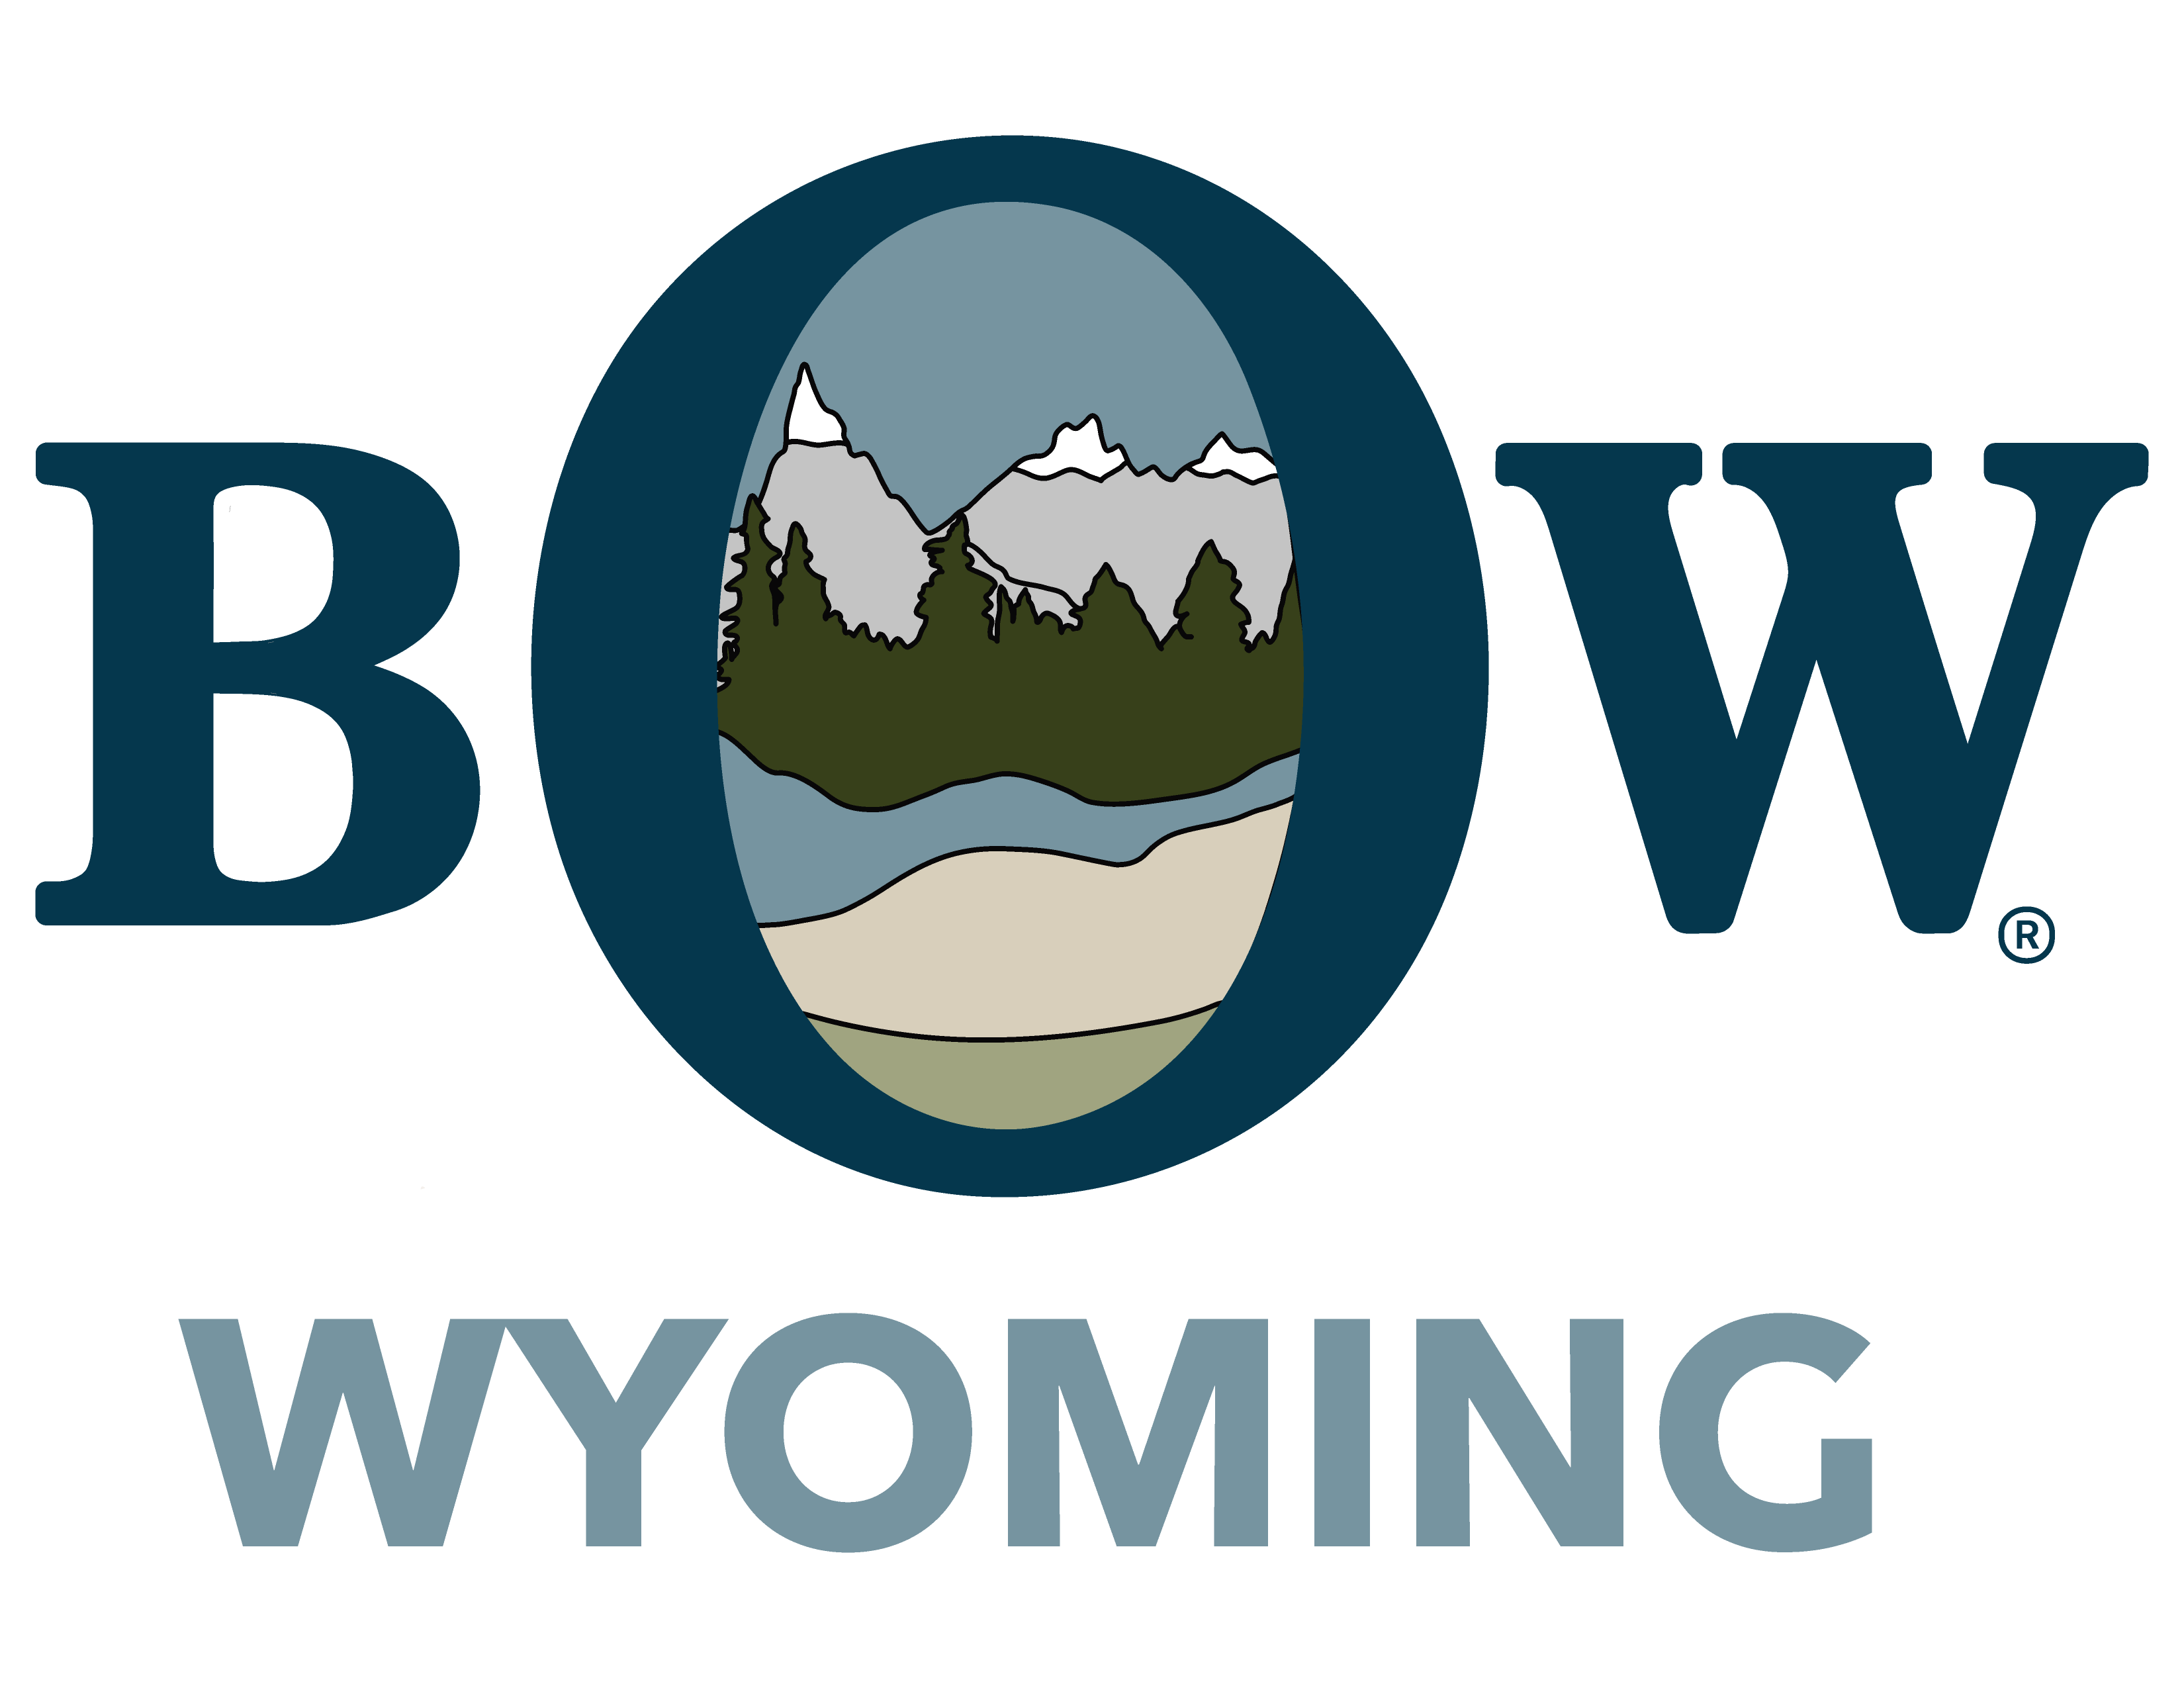 Becoming and Outdoors Woman (BOW) Logo 